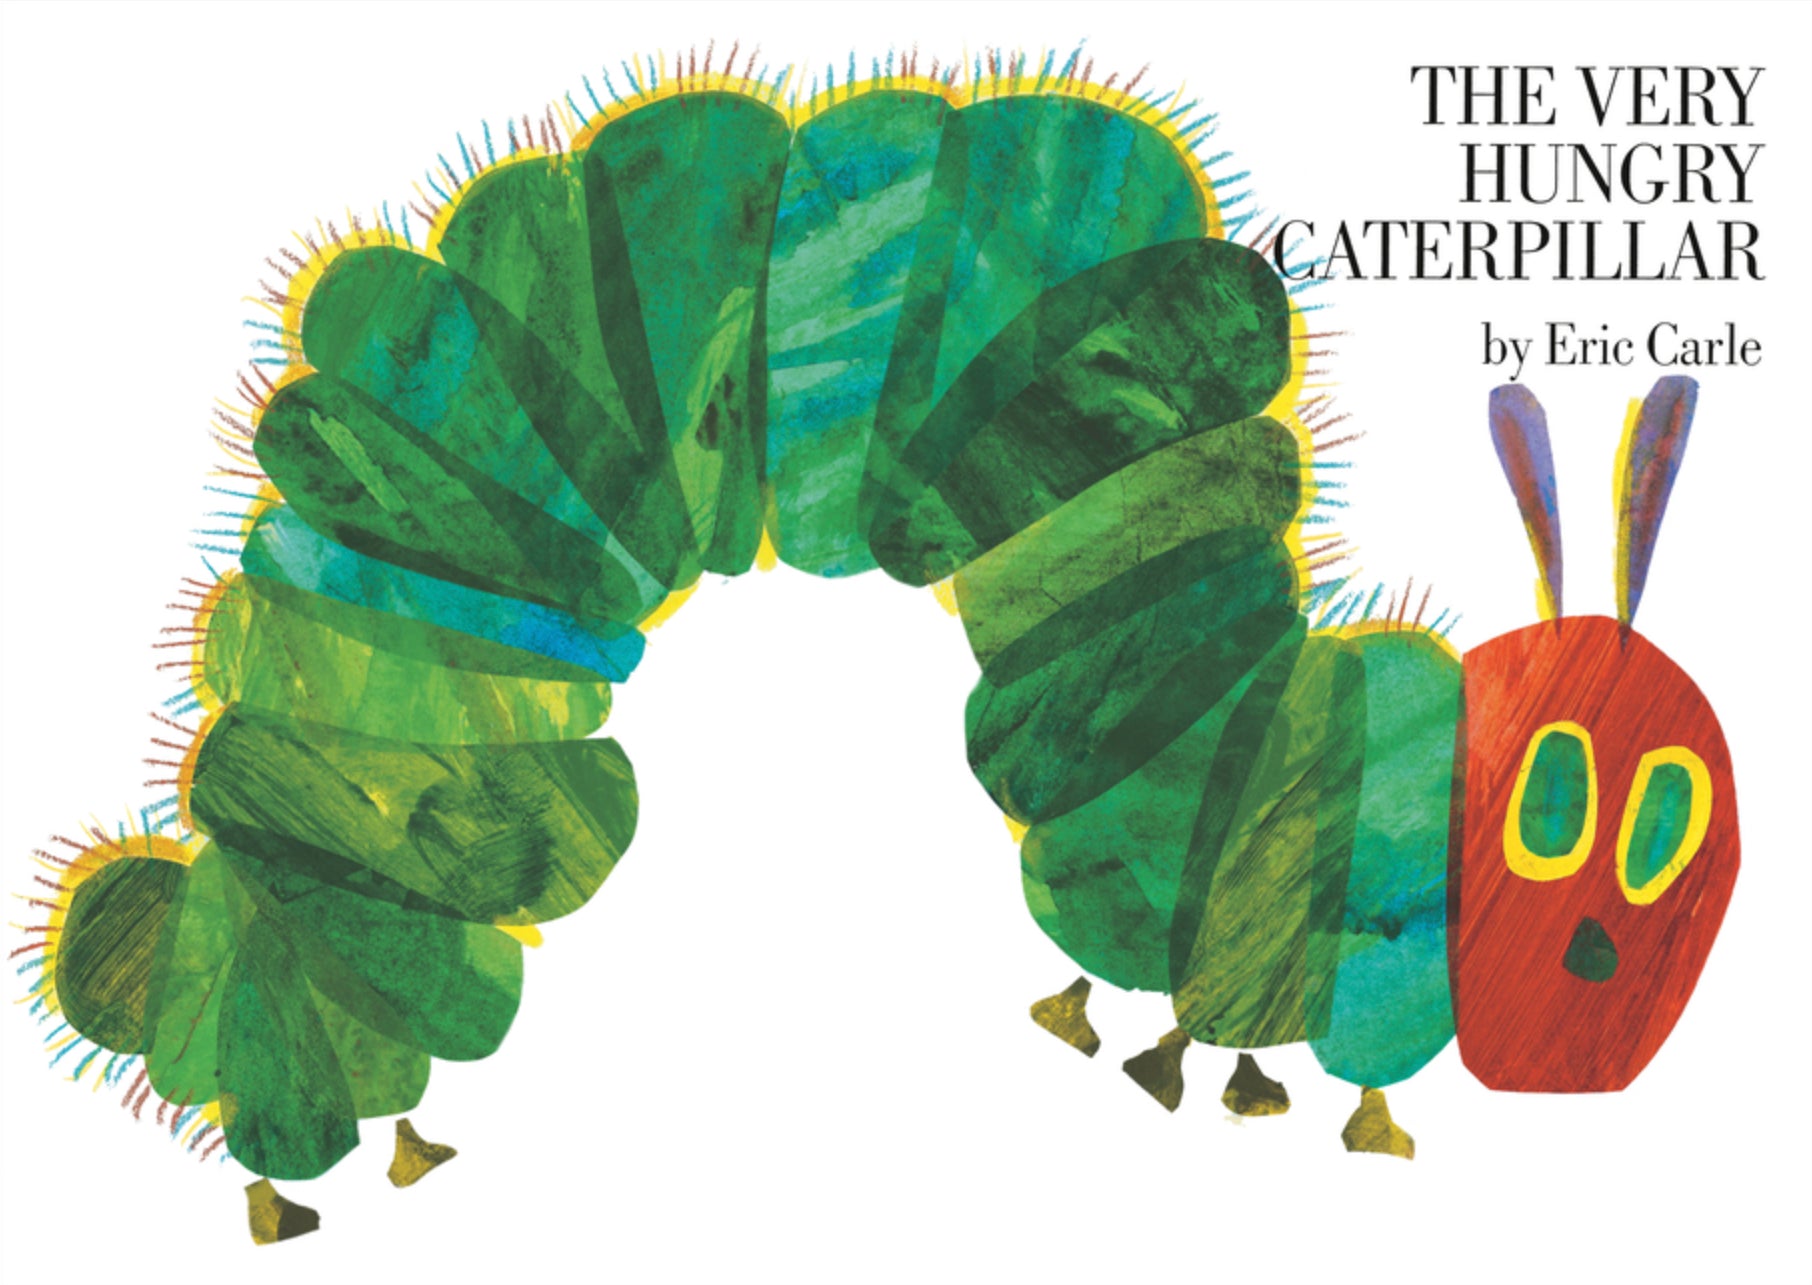 The Very Hungry Caterpillar, Eric Carle